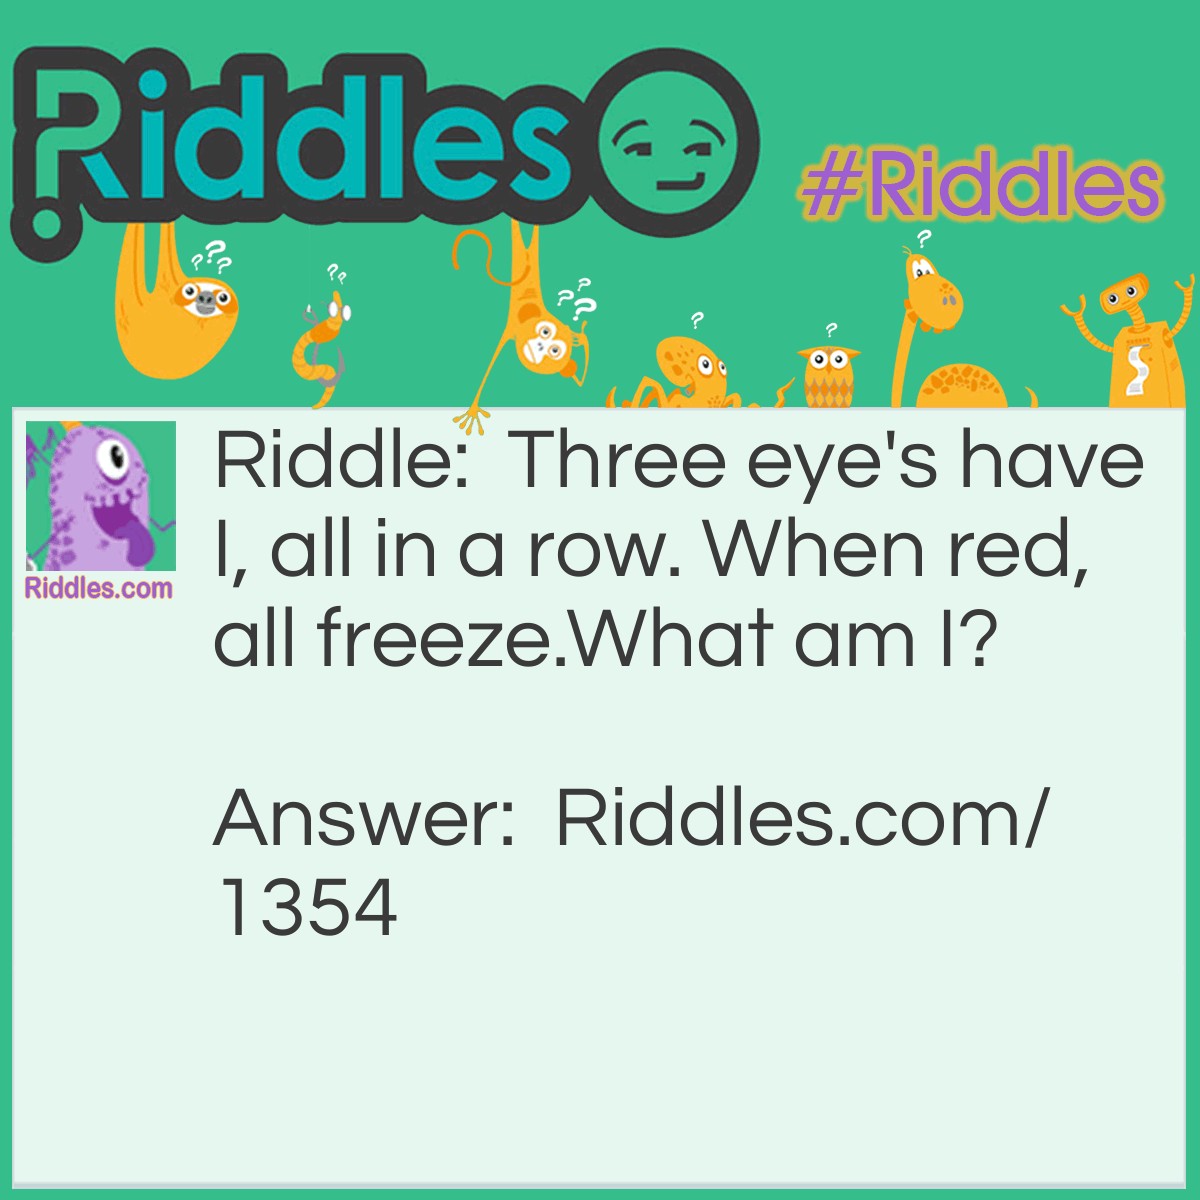 Riddle: Three eye's have I, all in a row. When red, all freeze.
What am I? Answer: A stoplight.